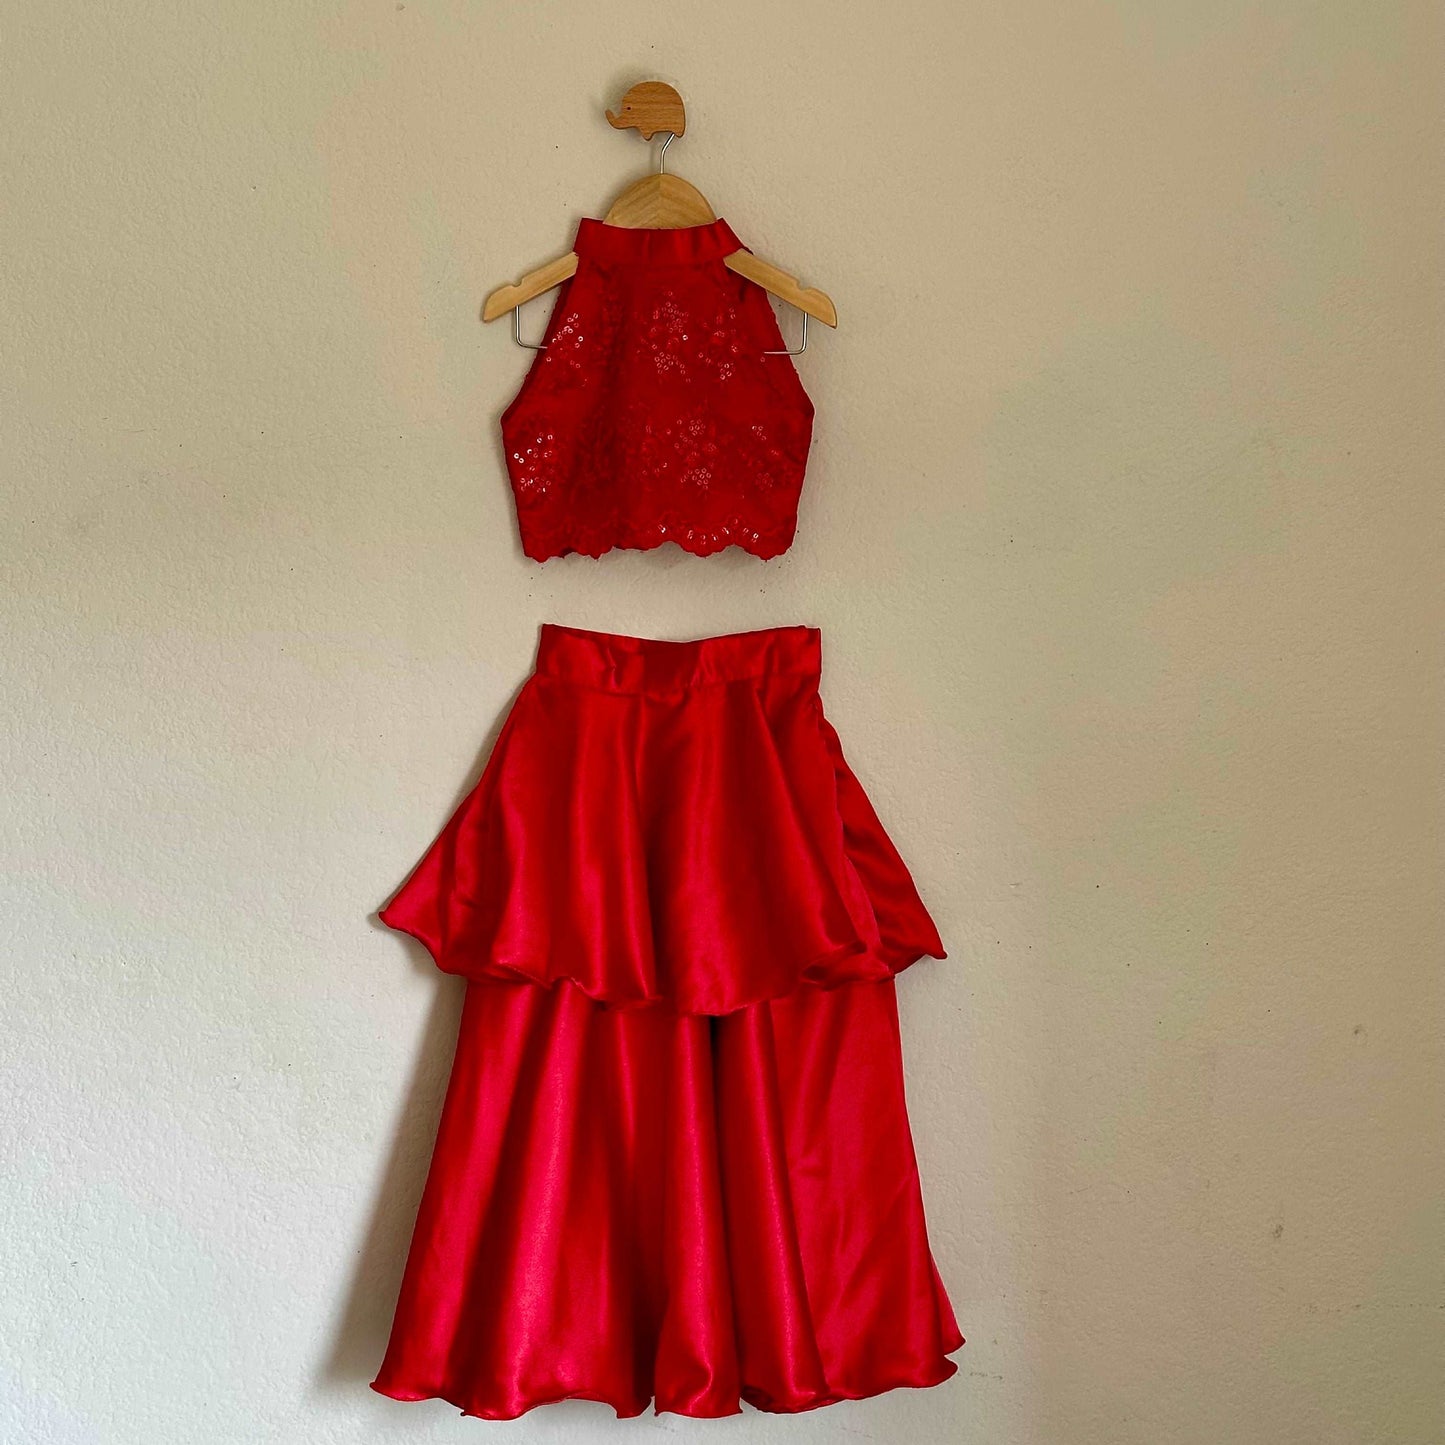 Glamorous Halter Neck with Stand Collar with Layers Circular Skirt | 4-5 Yrs - Kalas Couture